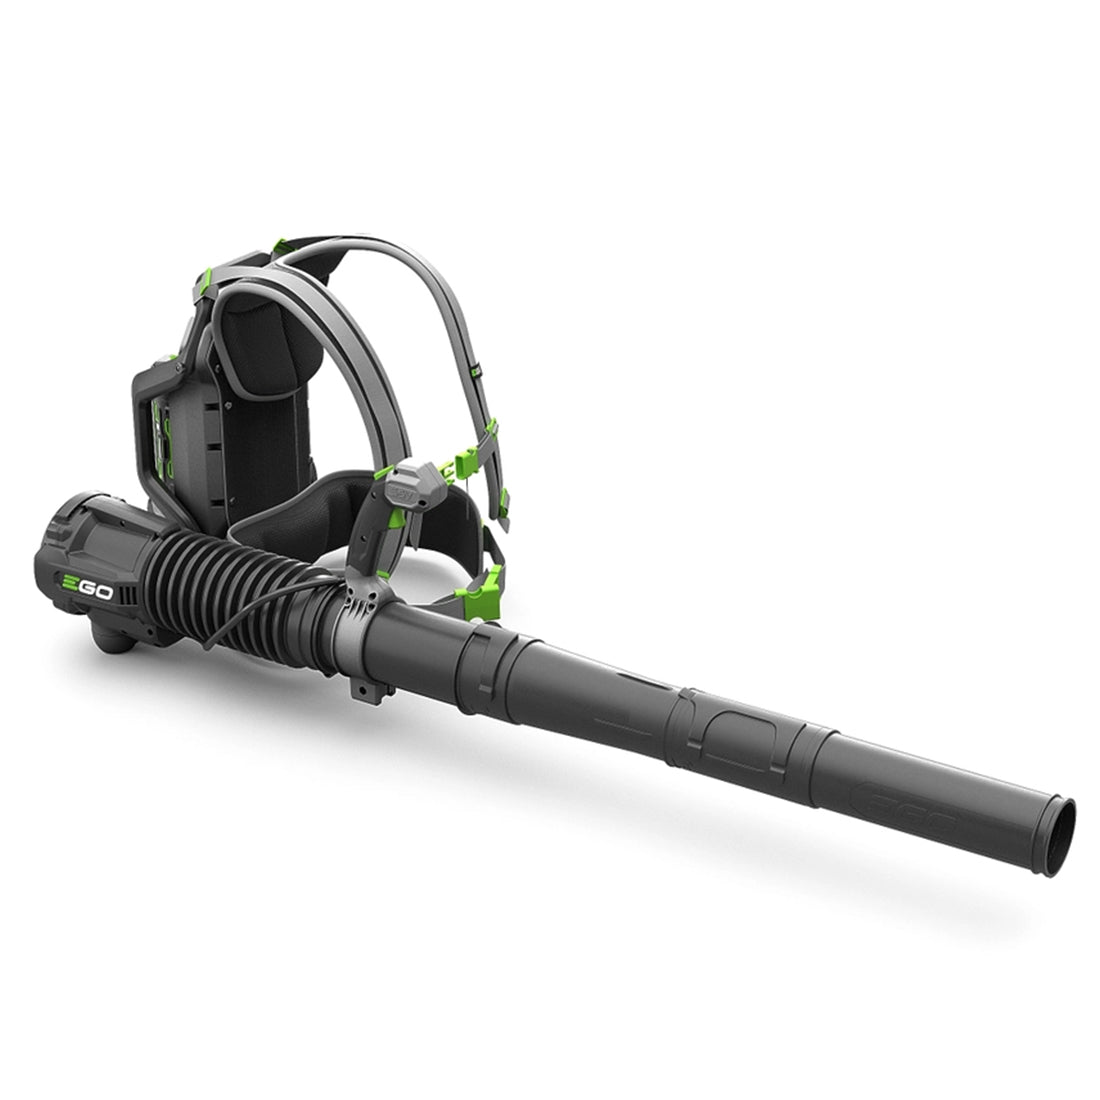 EGO Power+ 600 CFM Backpack Blower (Blower Only)